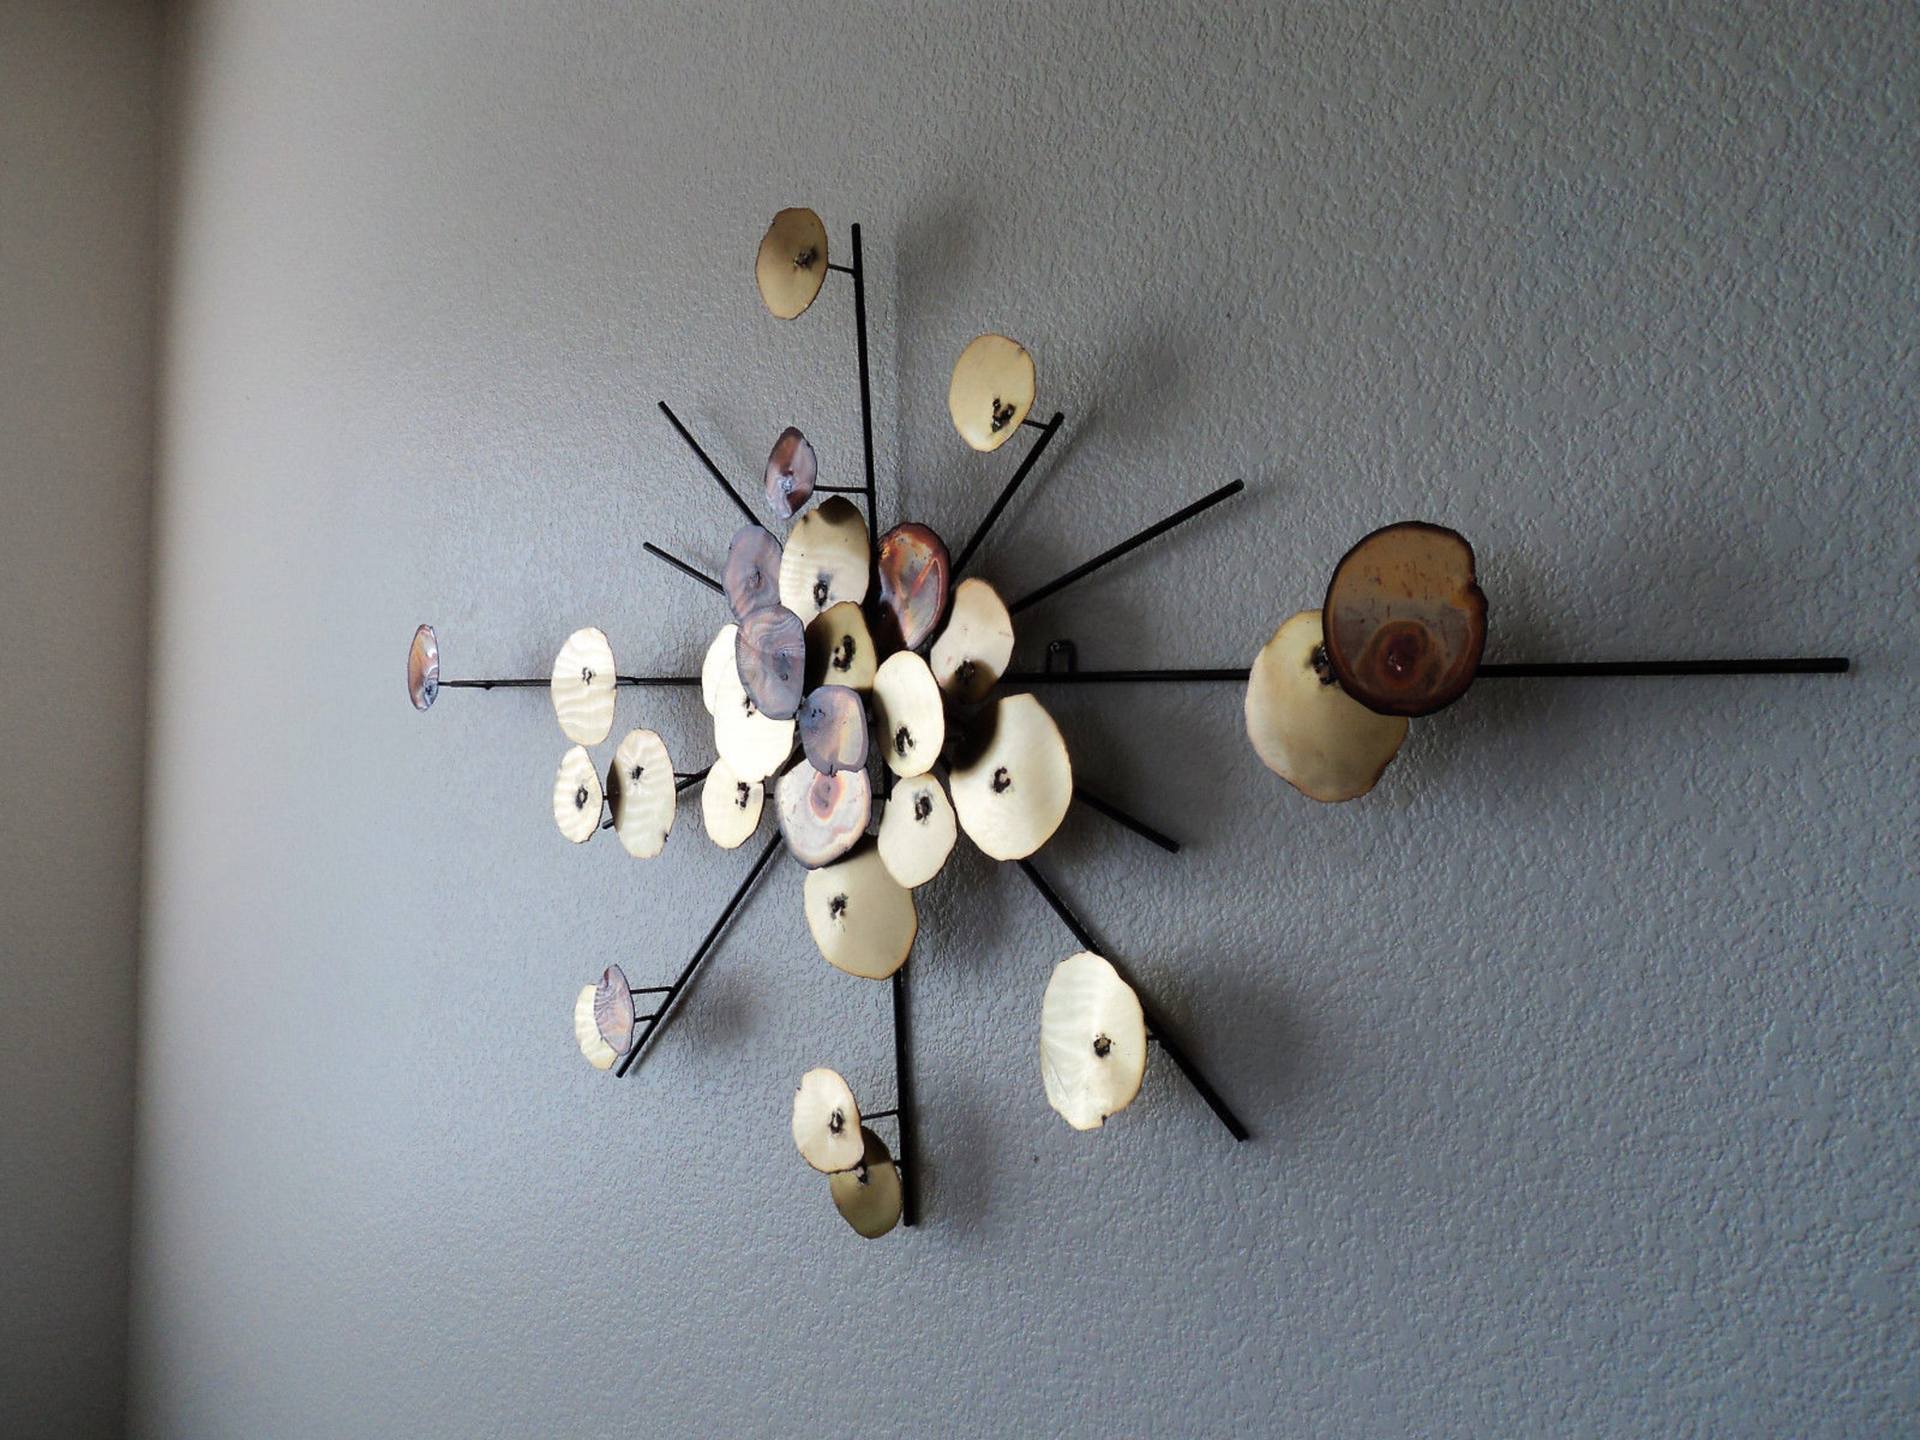 Reverb Mid Century Modern Retro Stainless Steel Wall Sculpture by